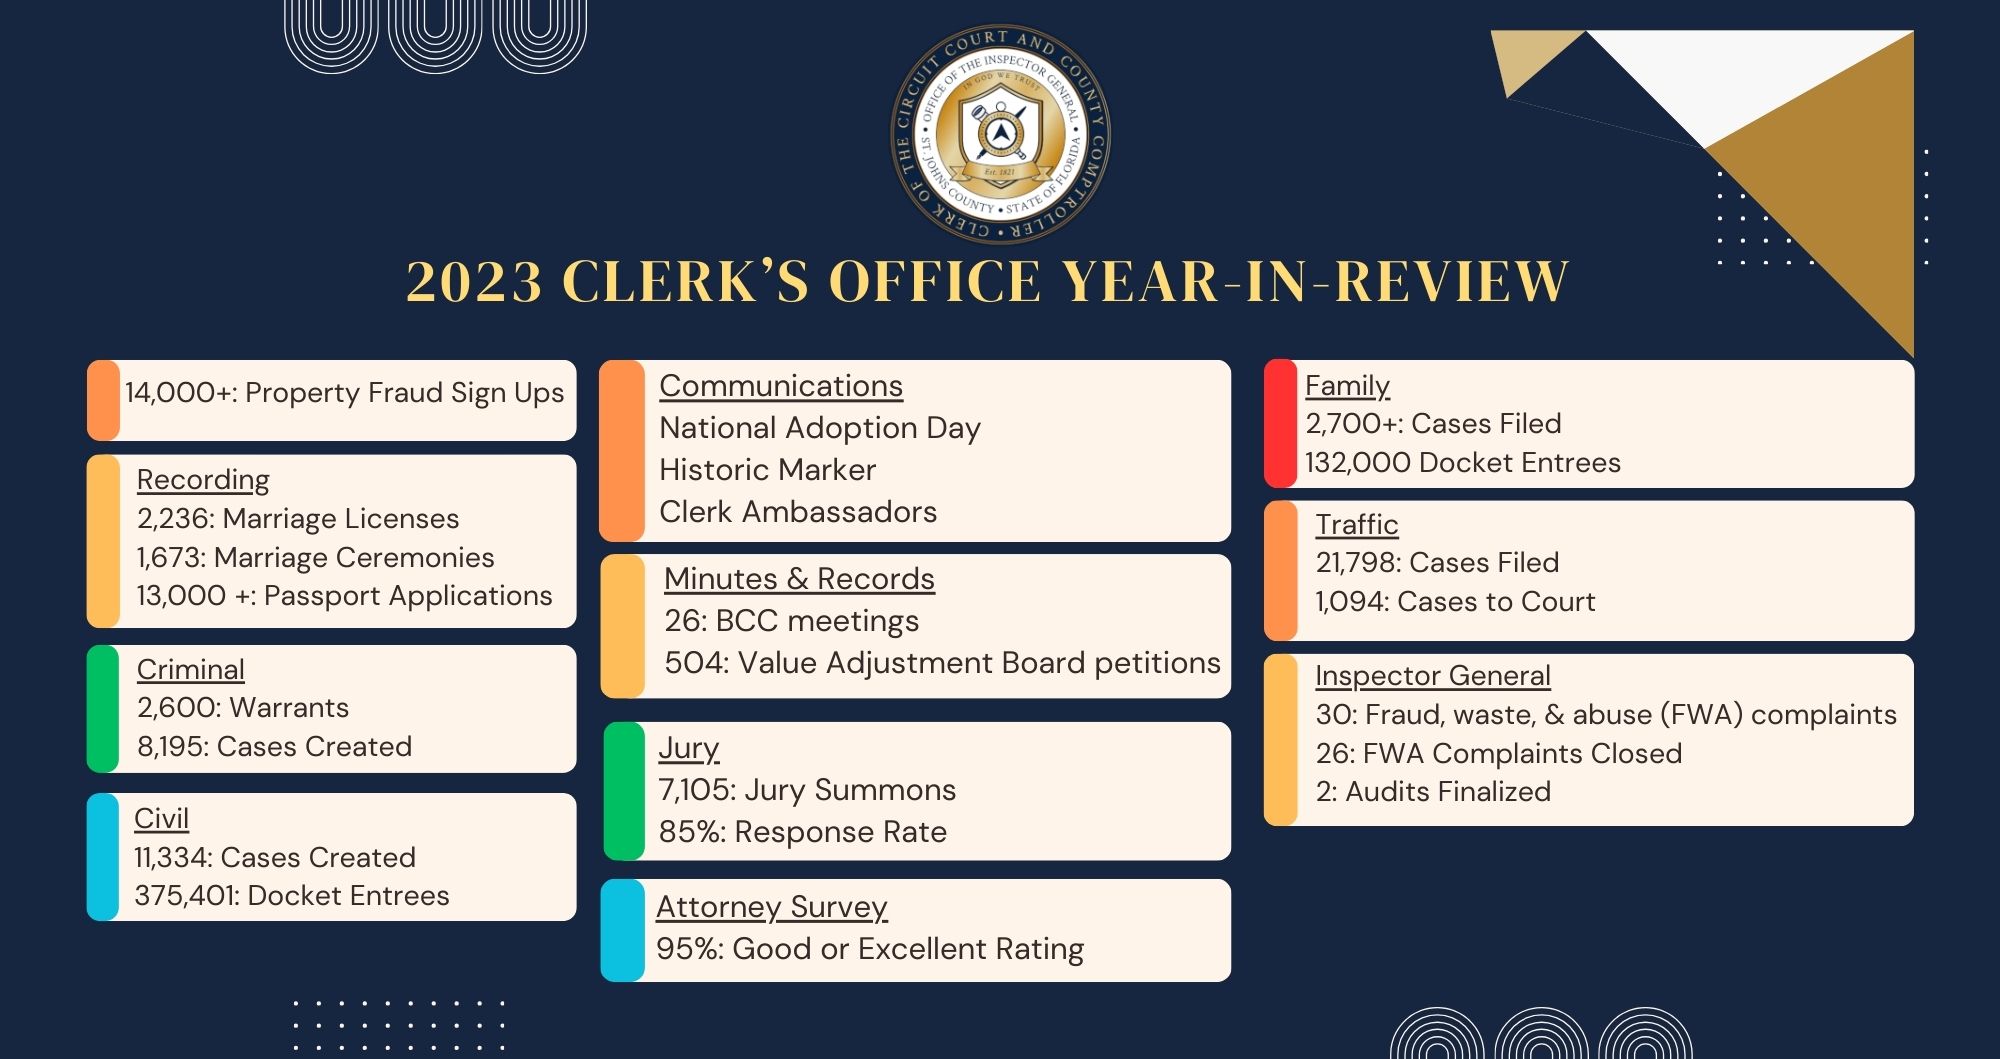 2023 Clerk’s Office Year-In-Review